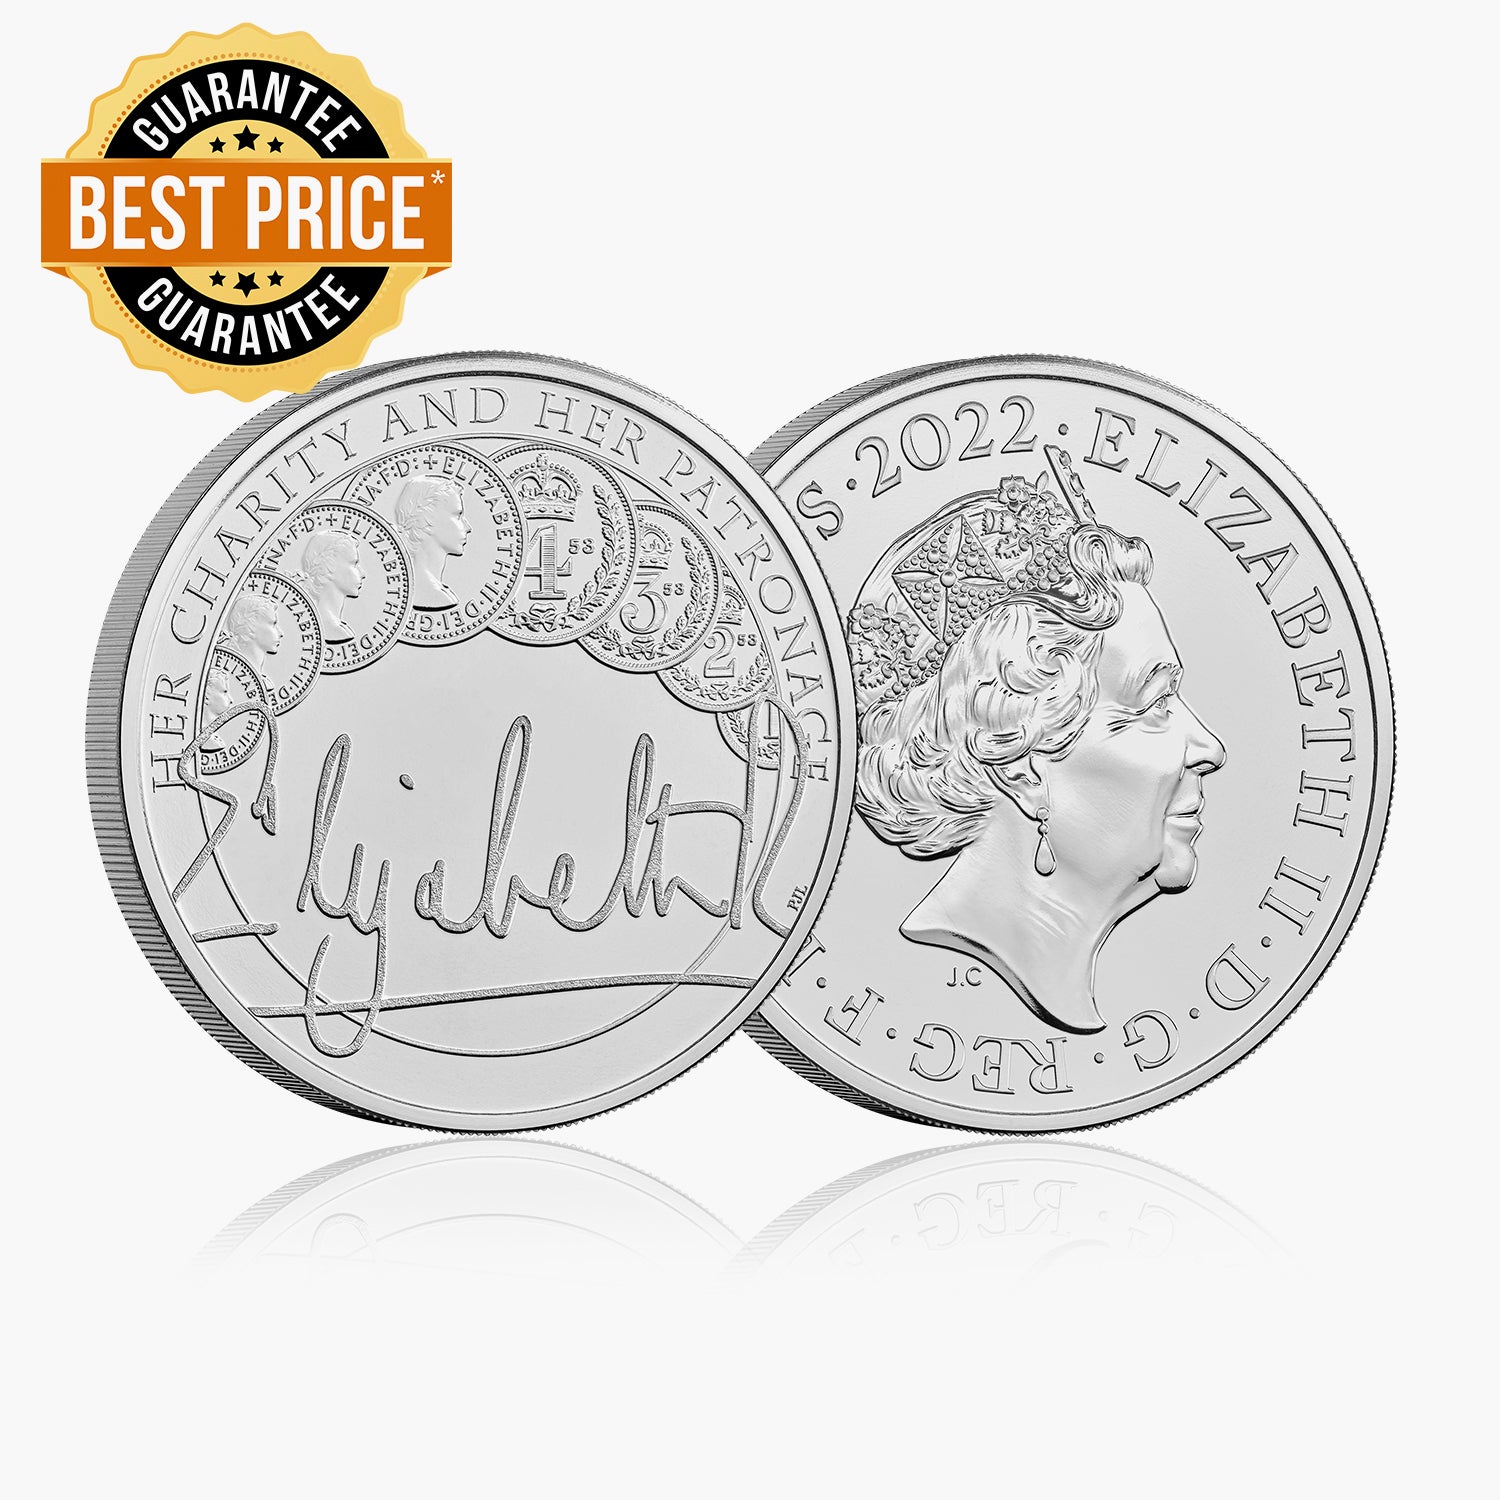 The Official Queen’s Reign Charity & Patronage 2022 UK £5 BU Coin